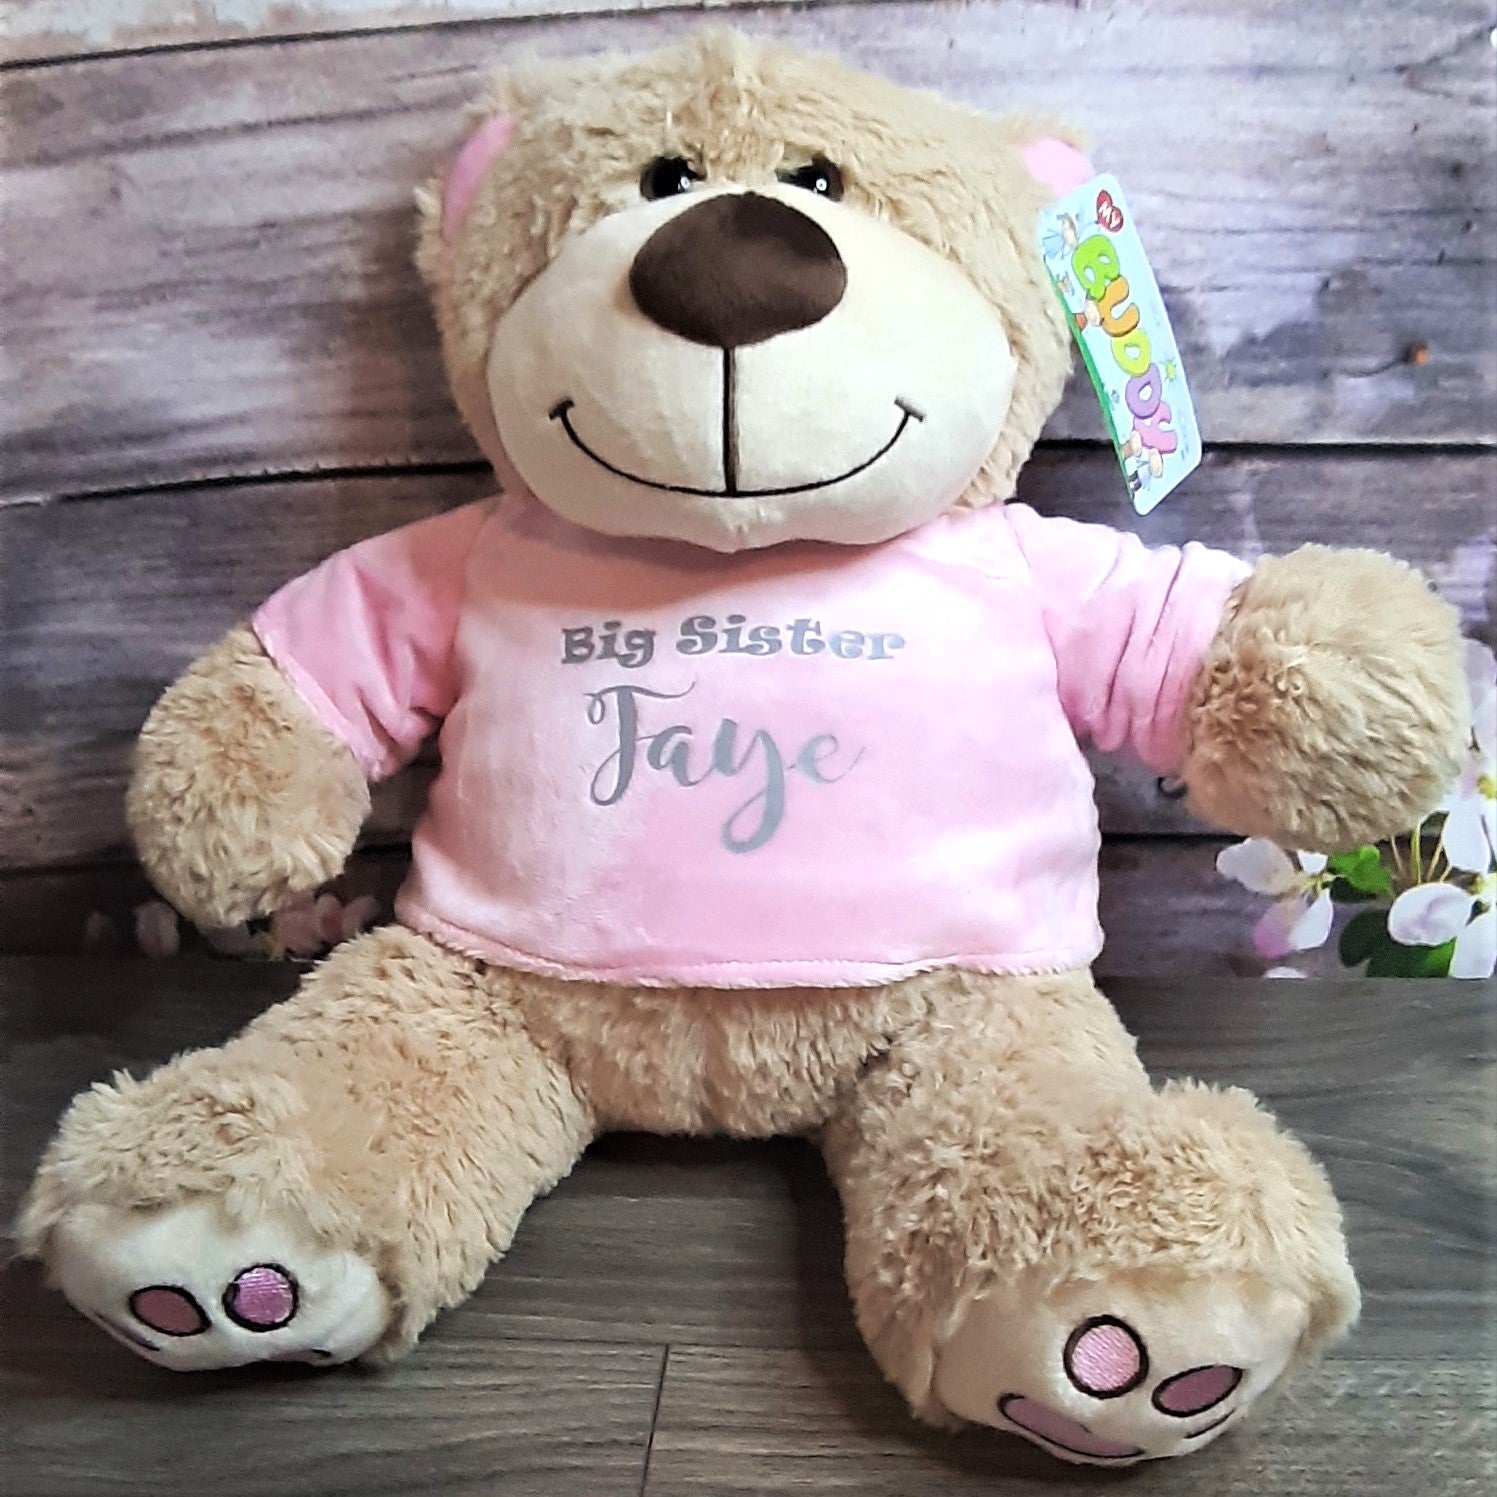 large personalised t shirt teddy bear with blue or pink t shirt. Persoanlised with child's name or can be done with a message such as flowergirl or pageboy proposals. 